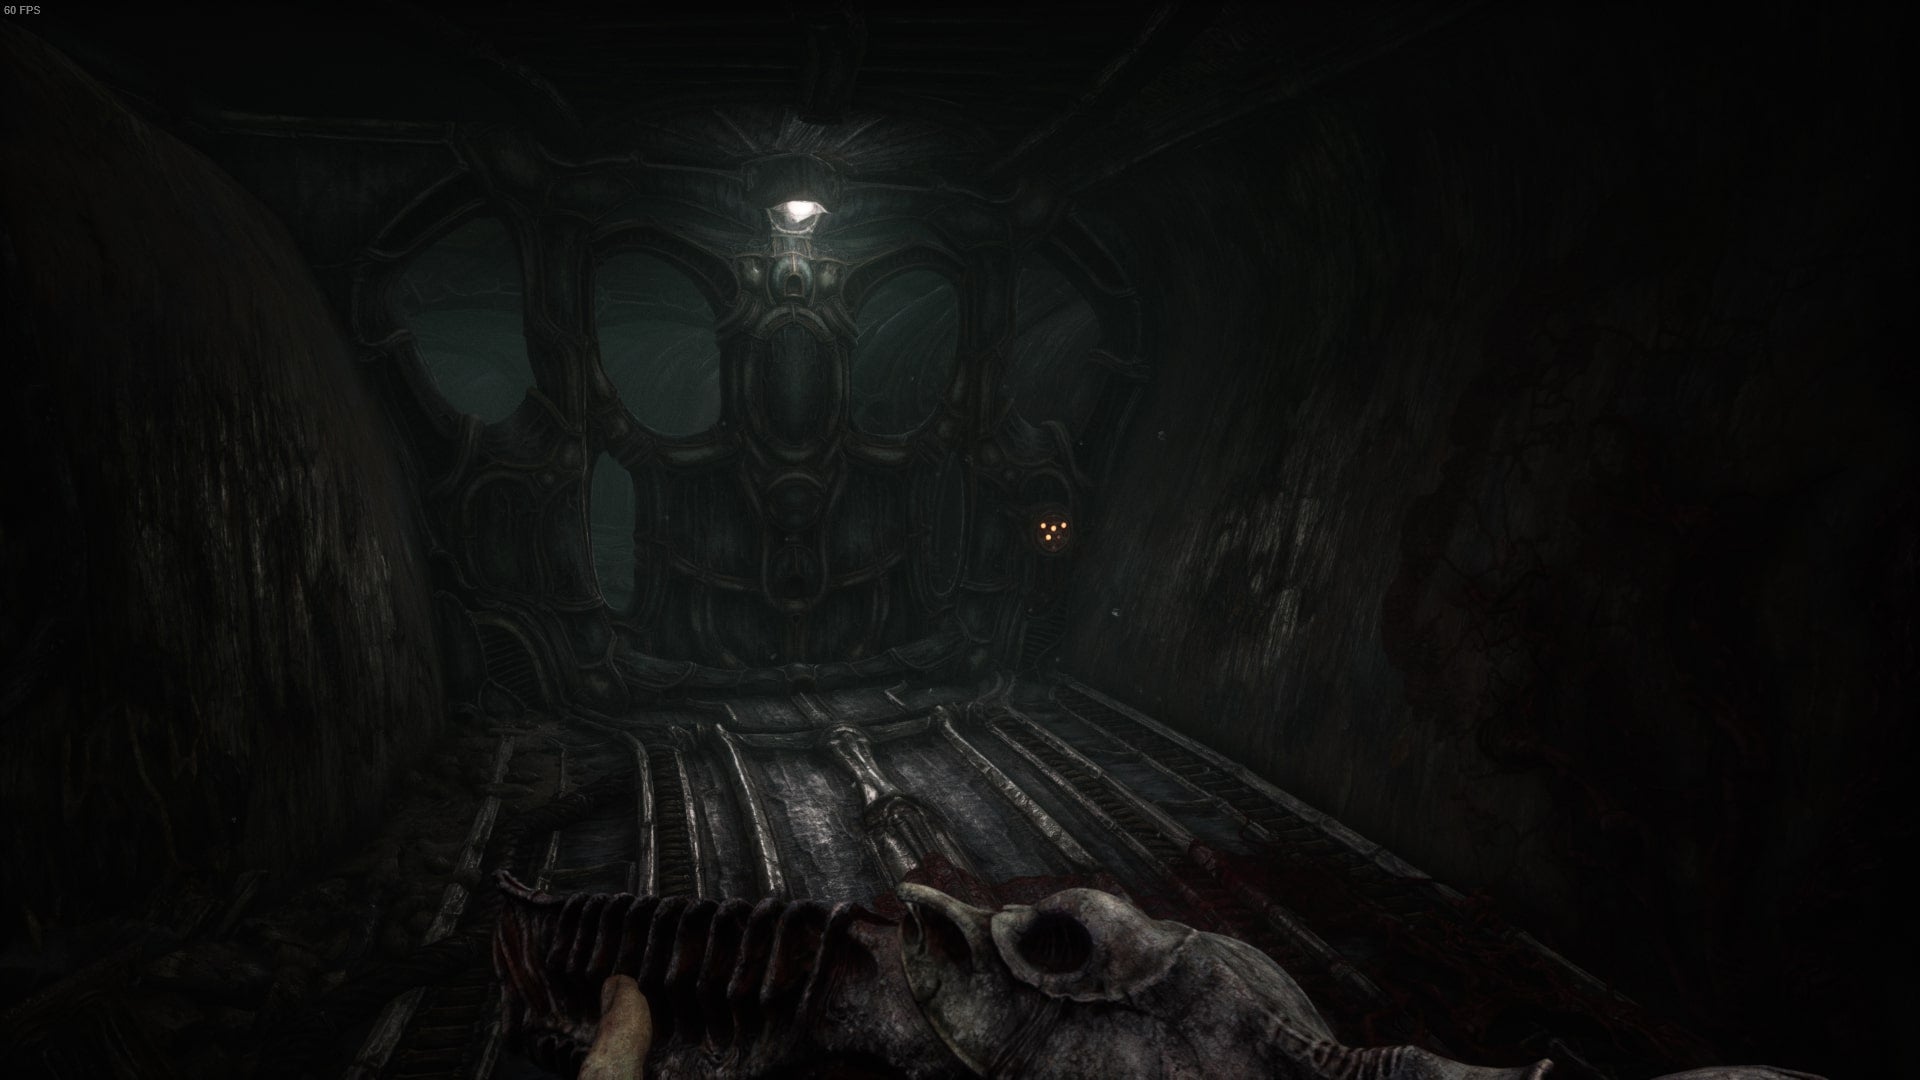 The player faces a closed gate in Act 4 of Scorn